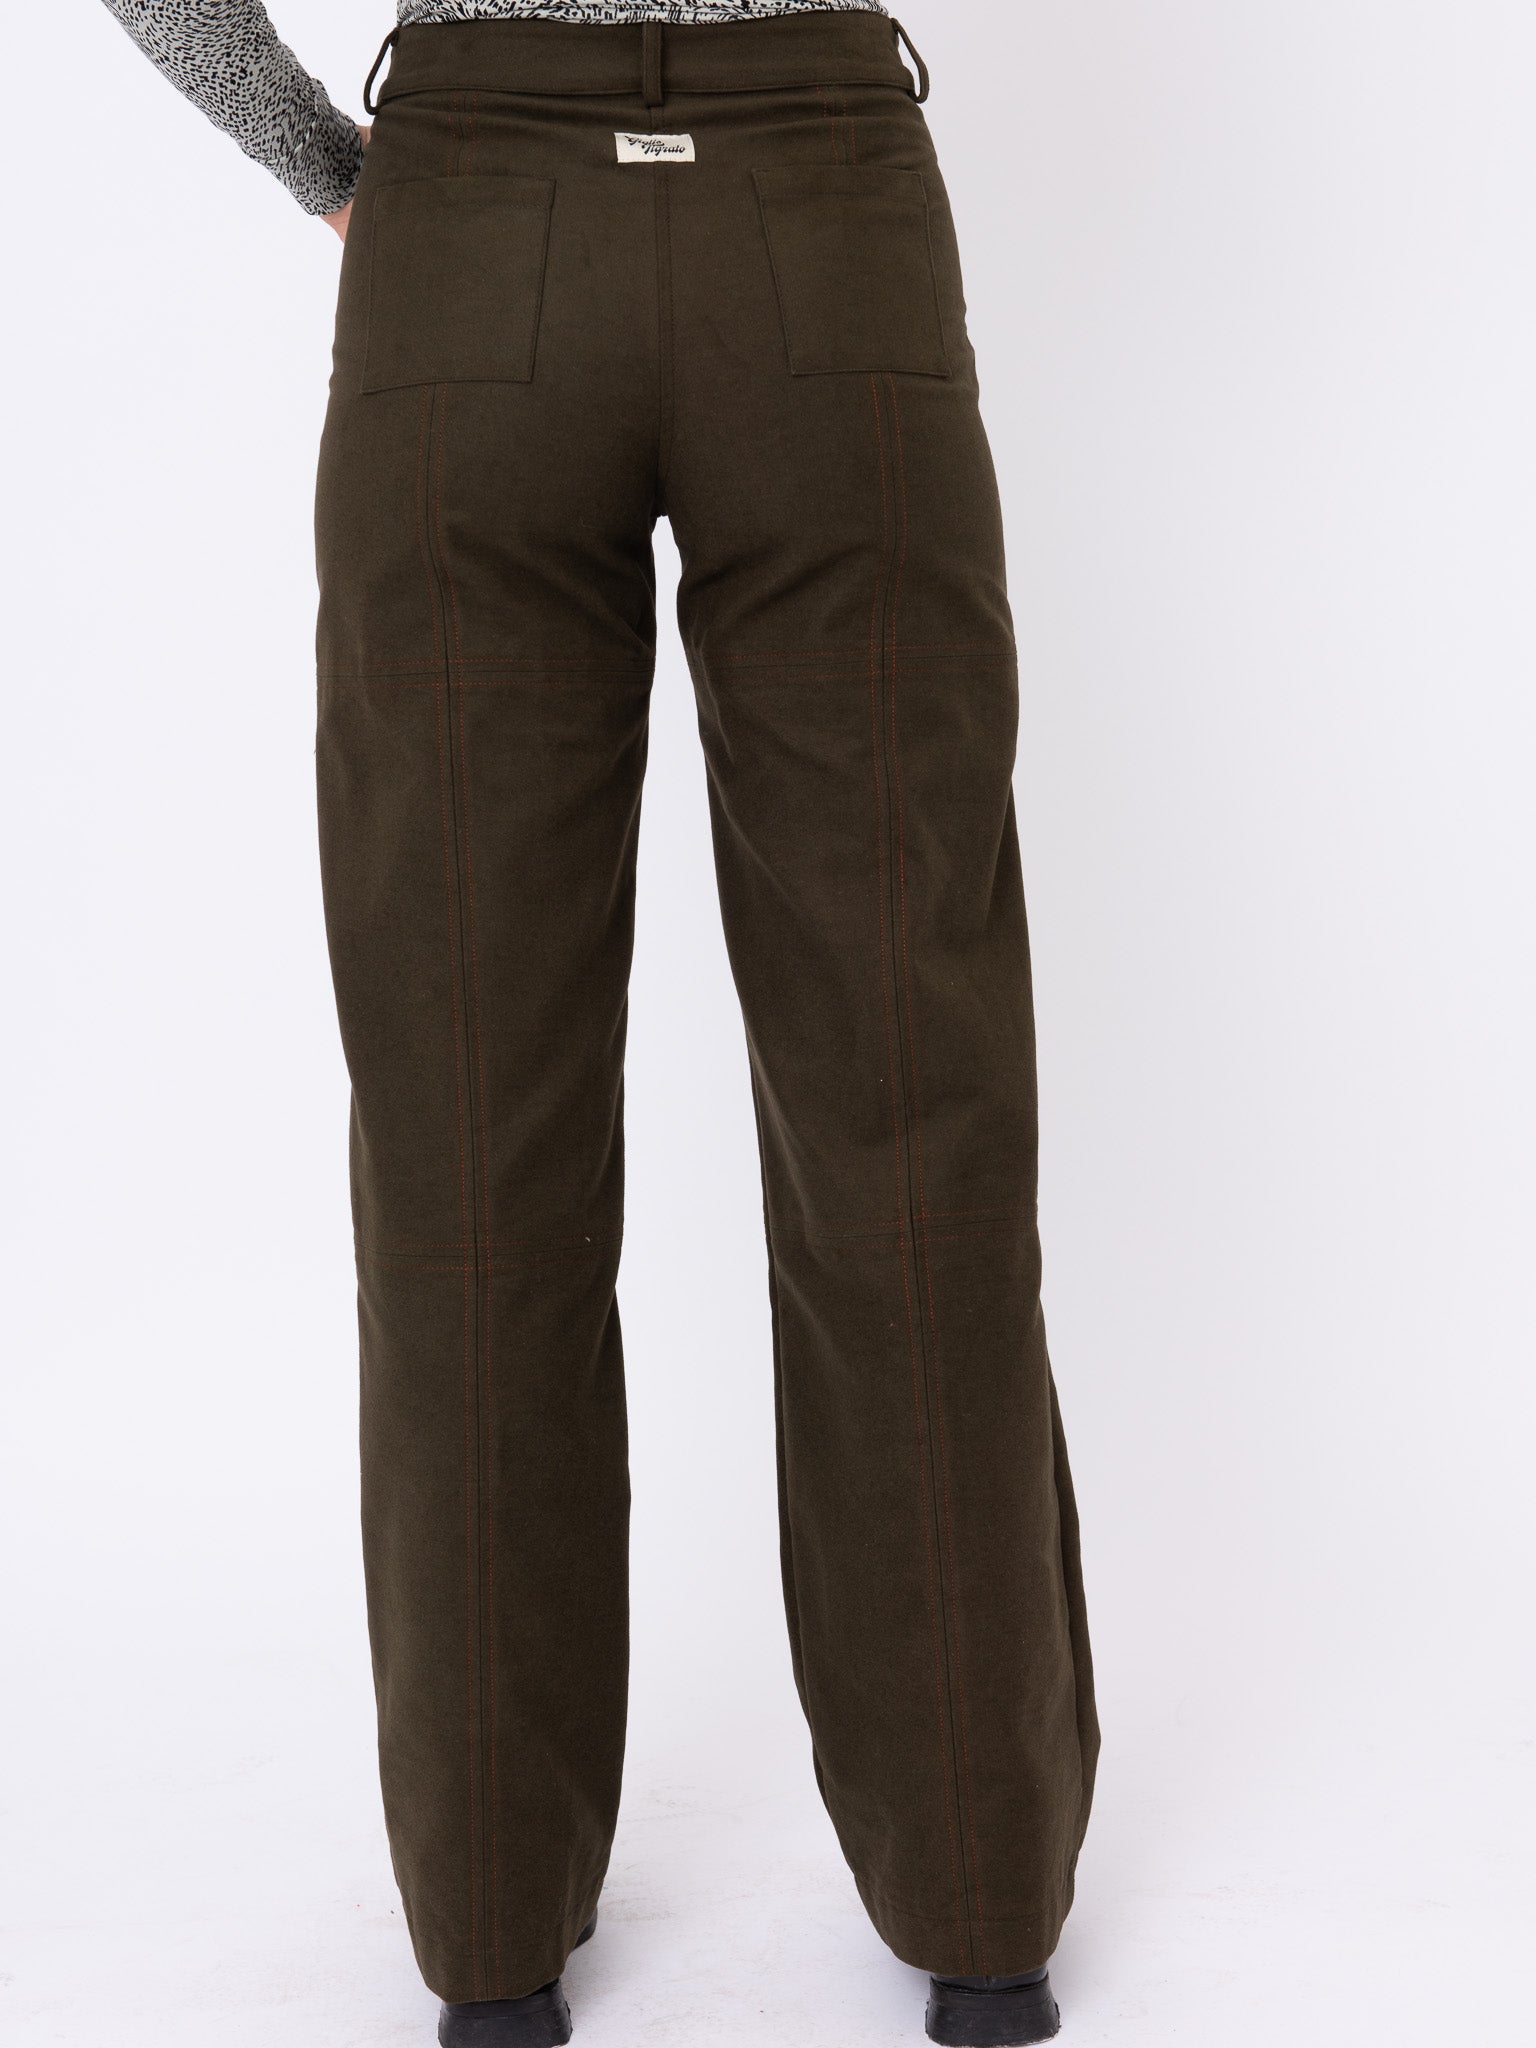 Bamboo Trousers, back view, straight pants, unique, regular fit